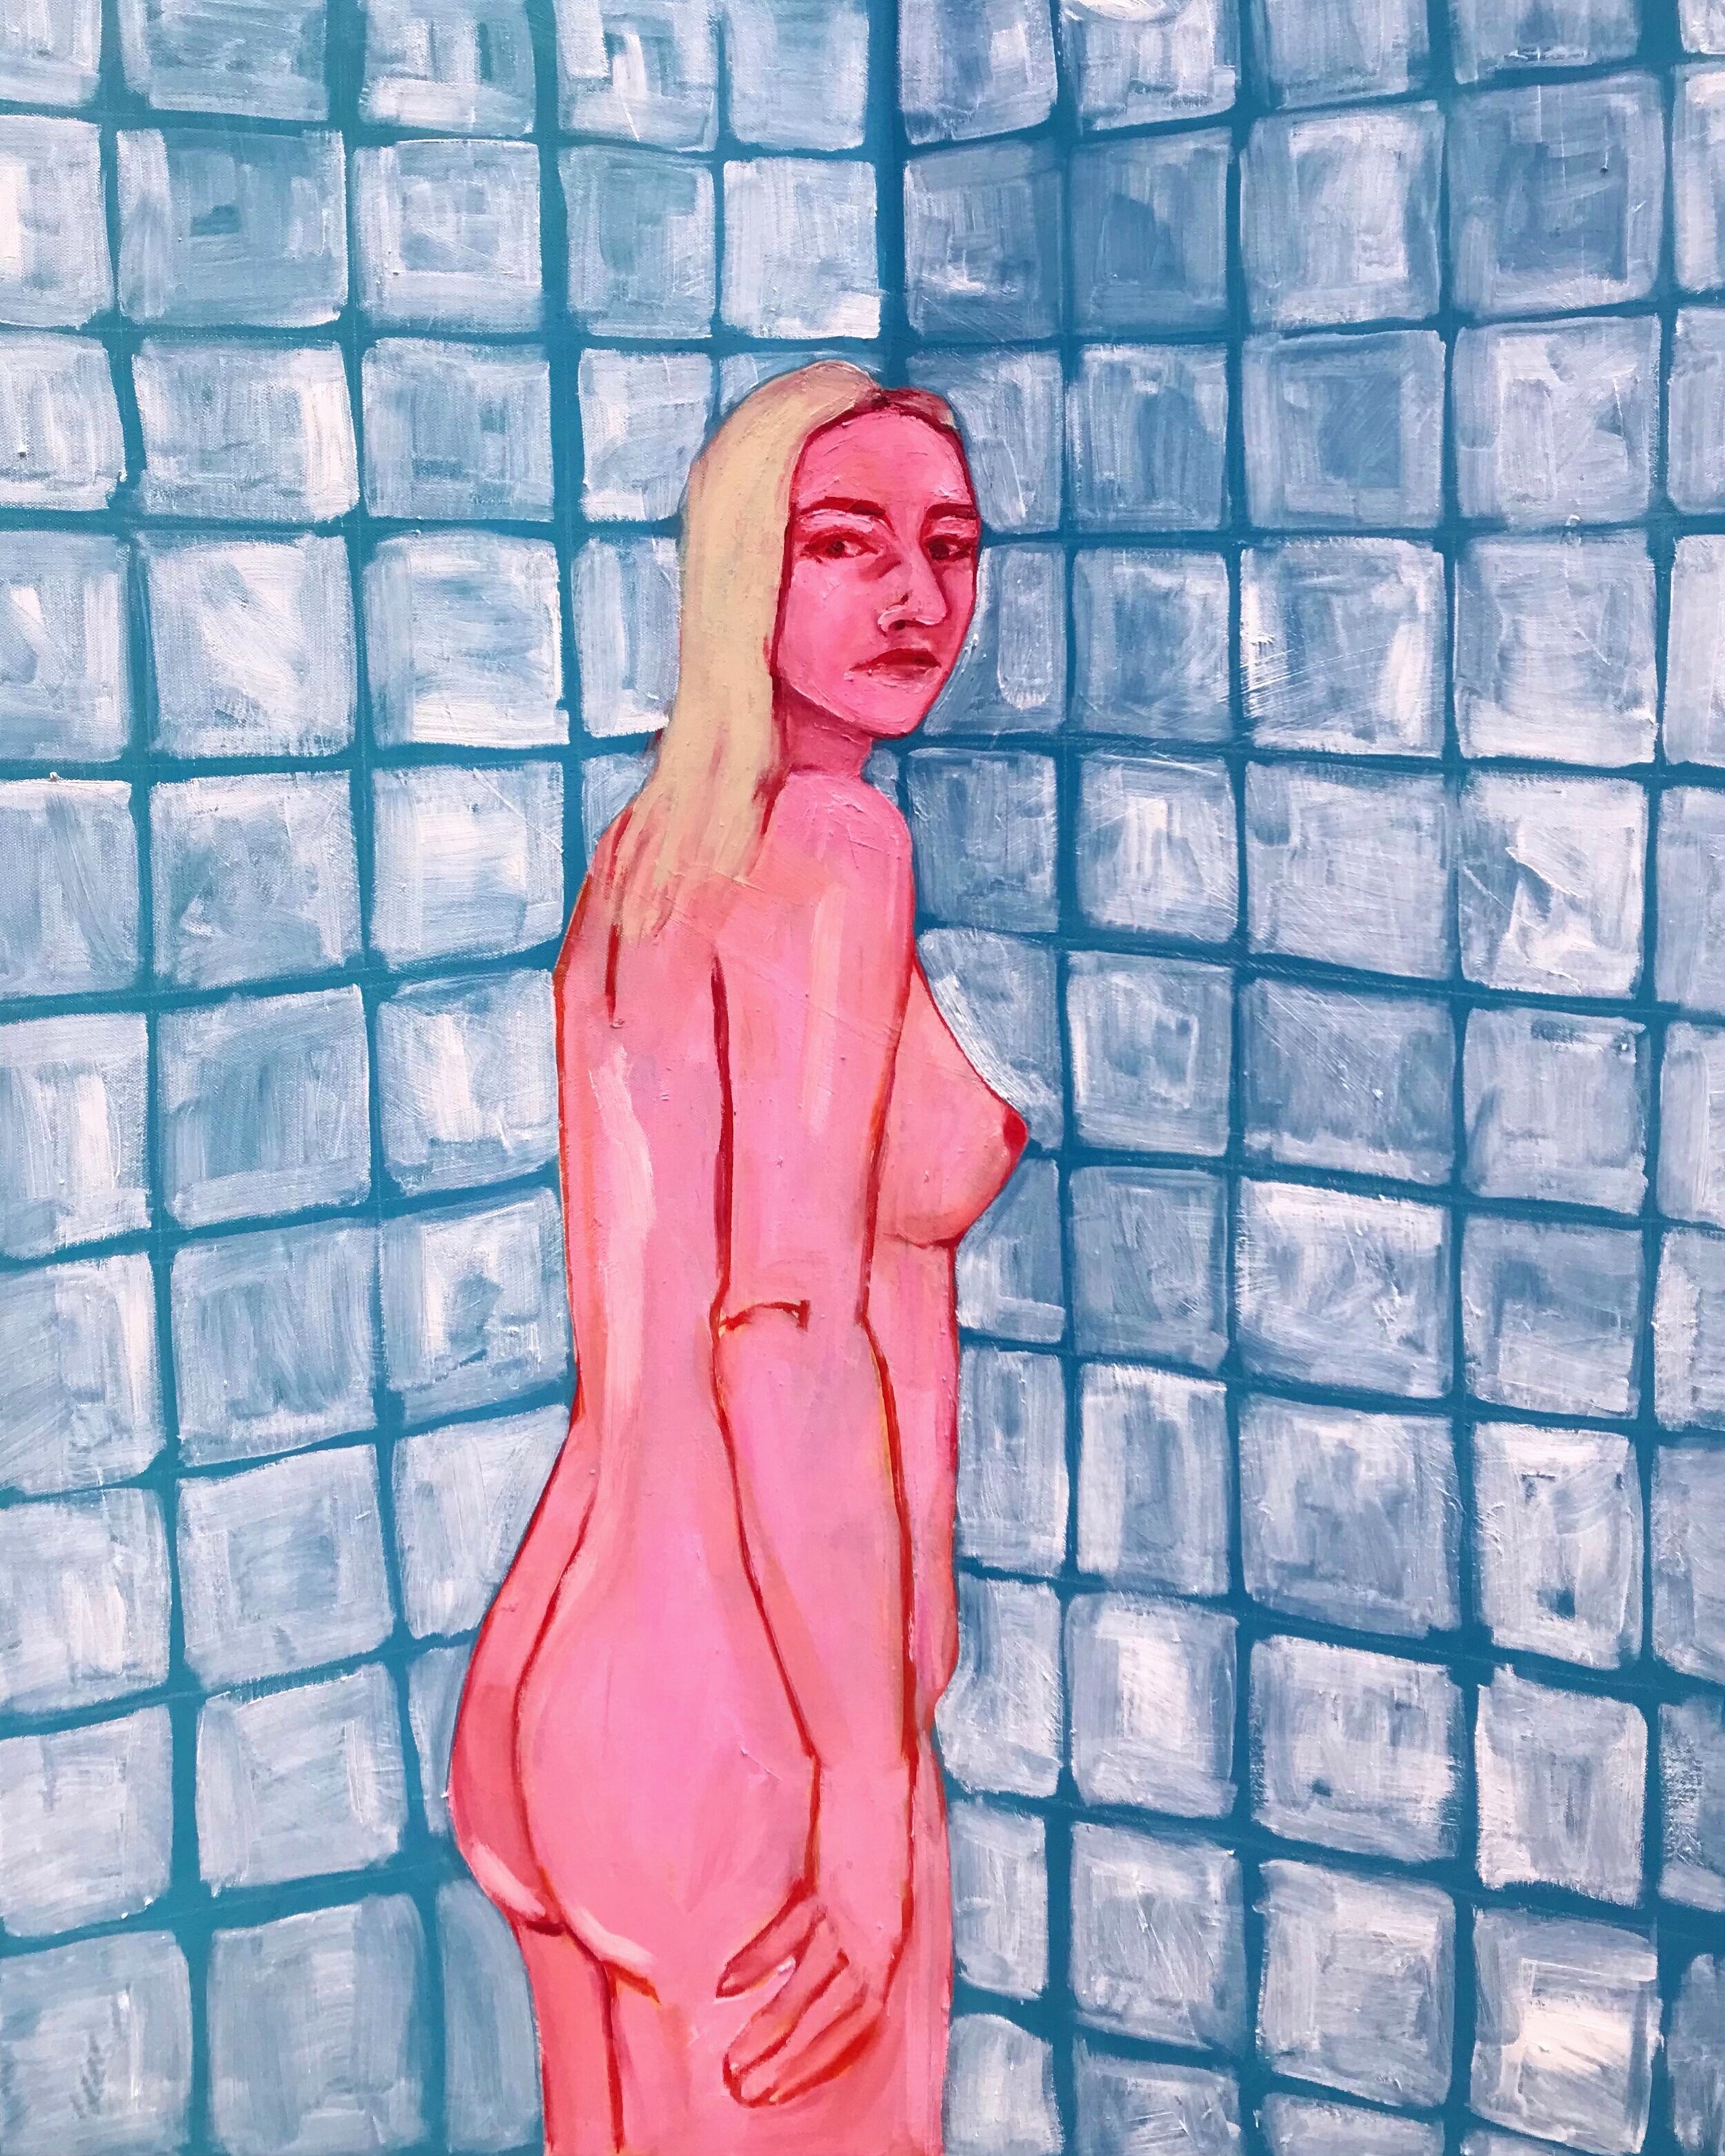  Shower Shot  Oil Paint on Canvas  2021  40 inches x 28 inches 